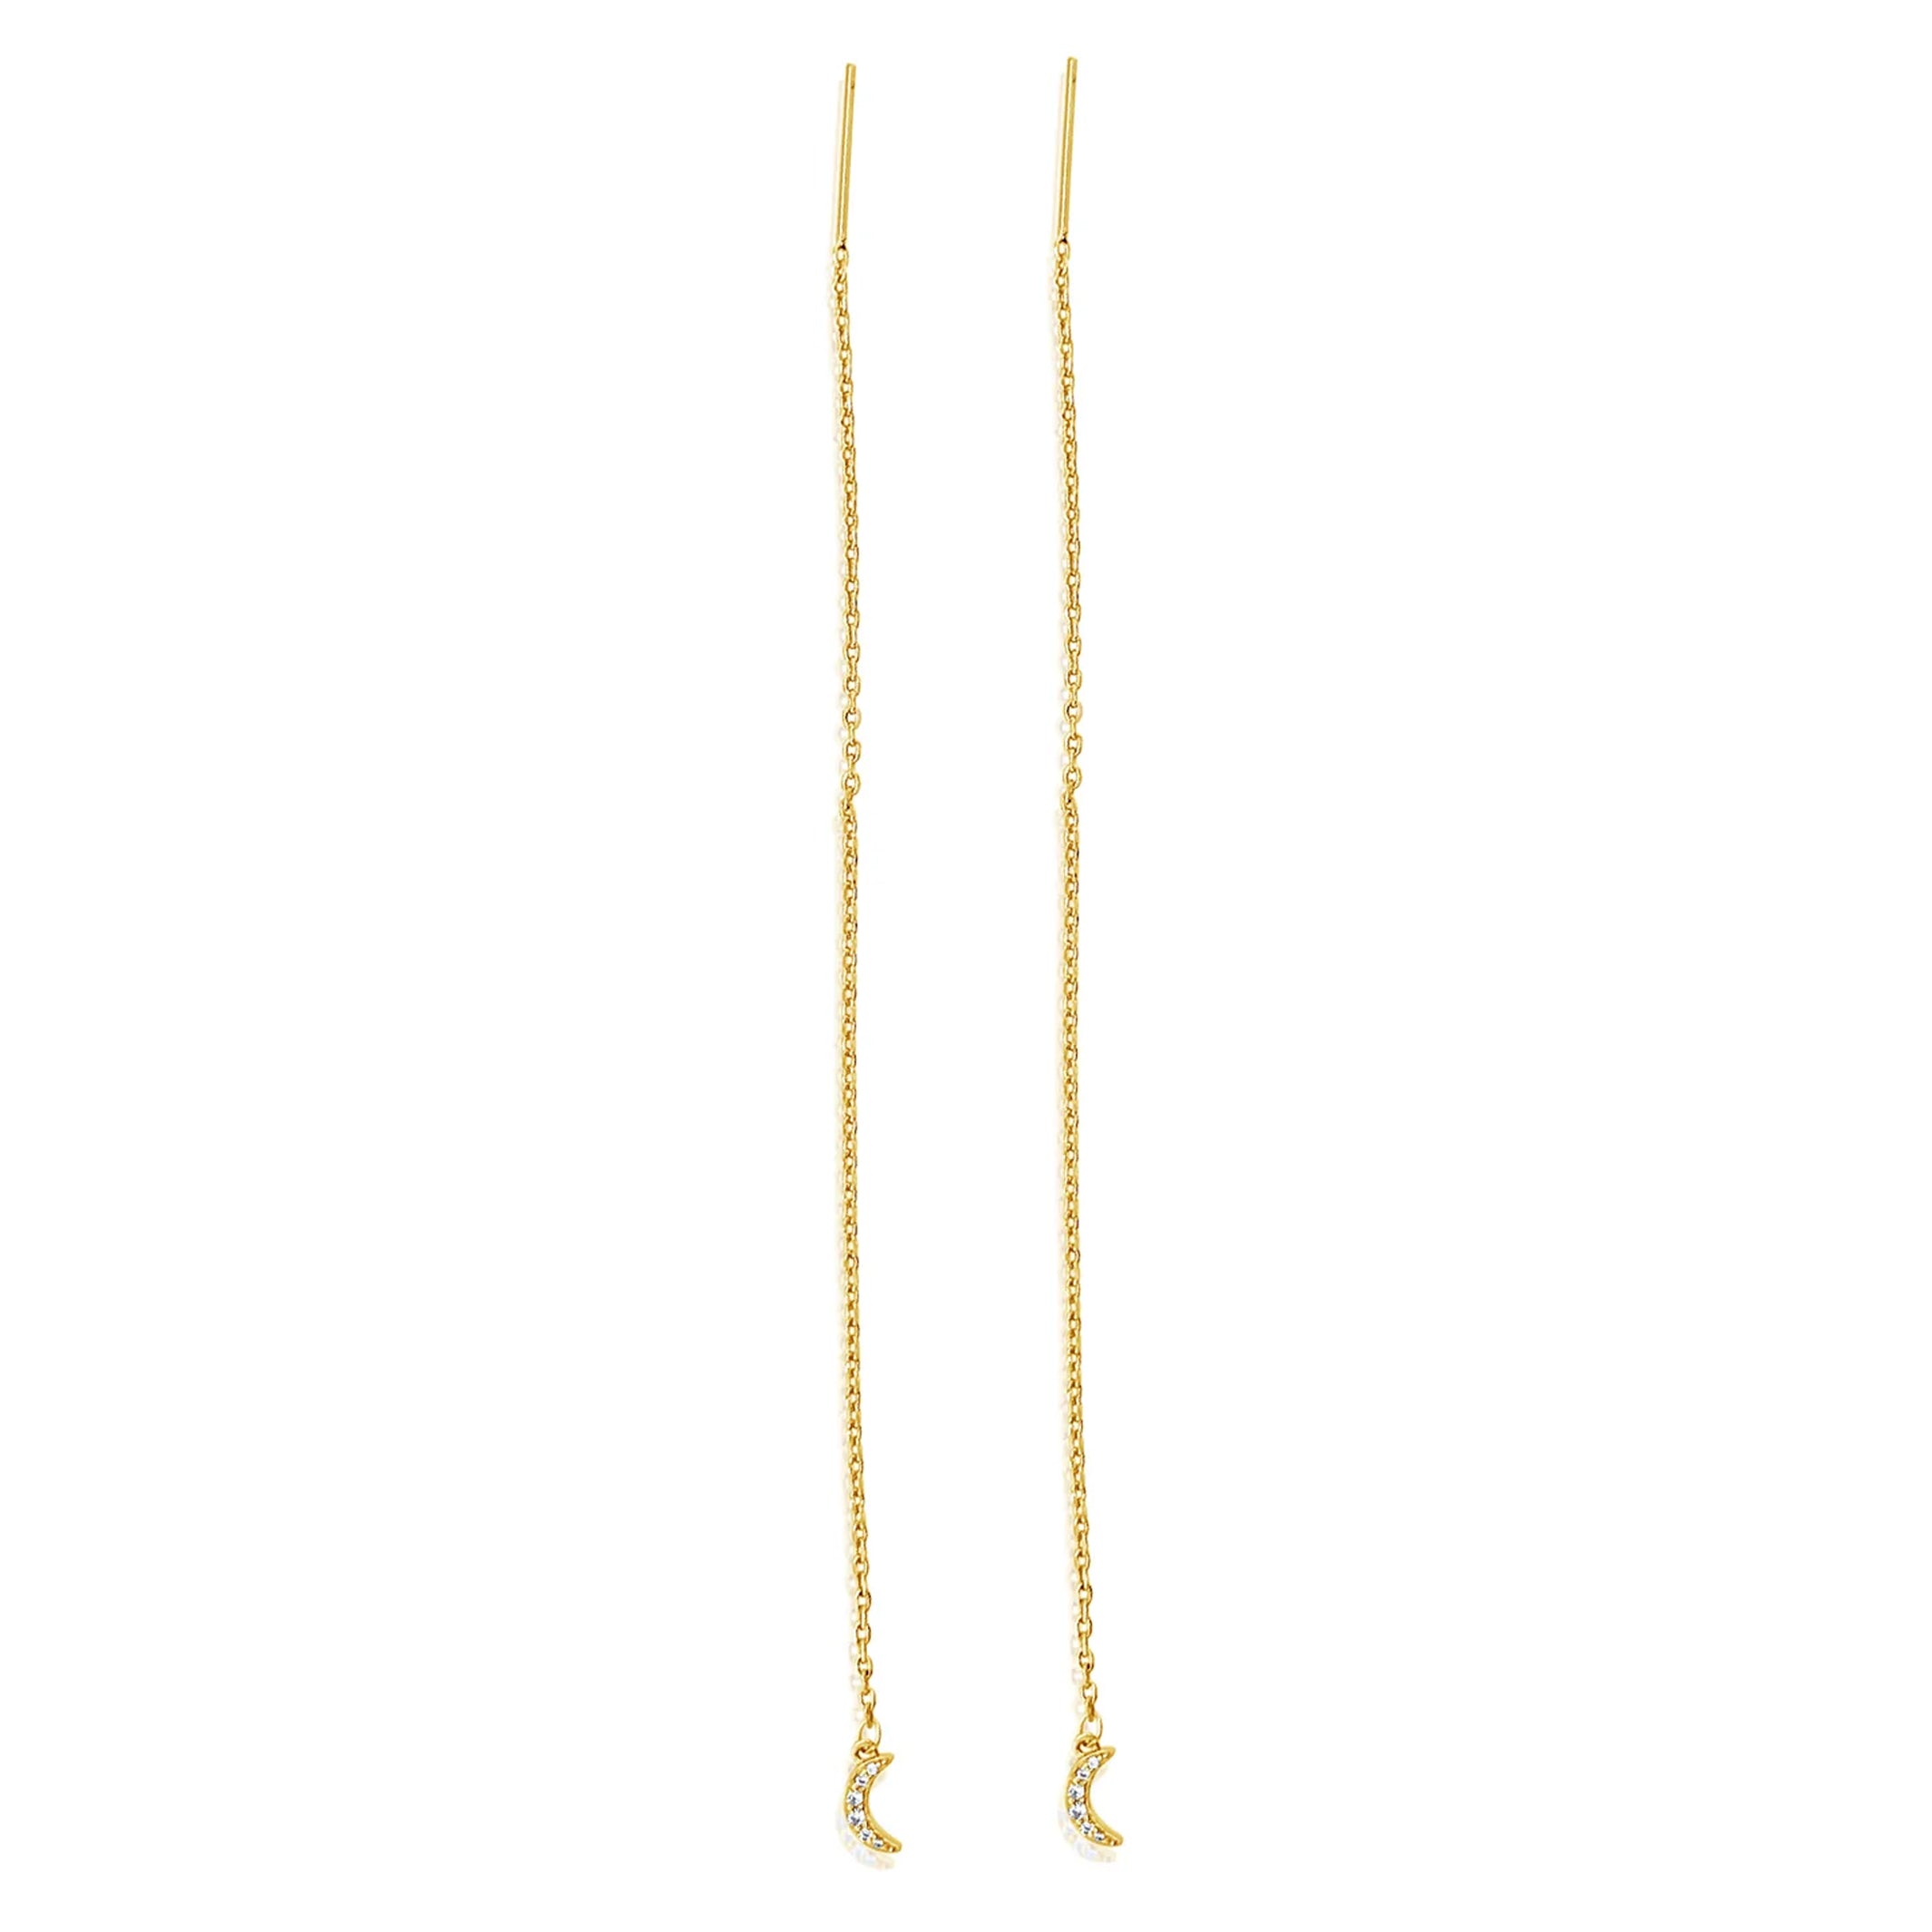 Chain Hoop Earrings - Available in Sterling Silver or 14k Gold Filled –  Austin Down to Earth